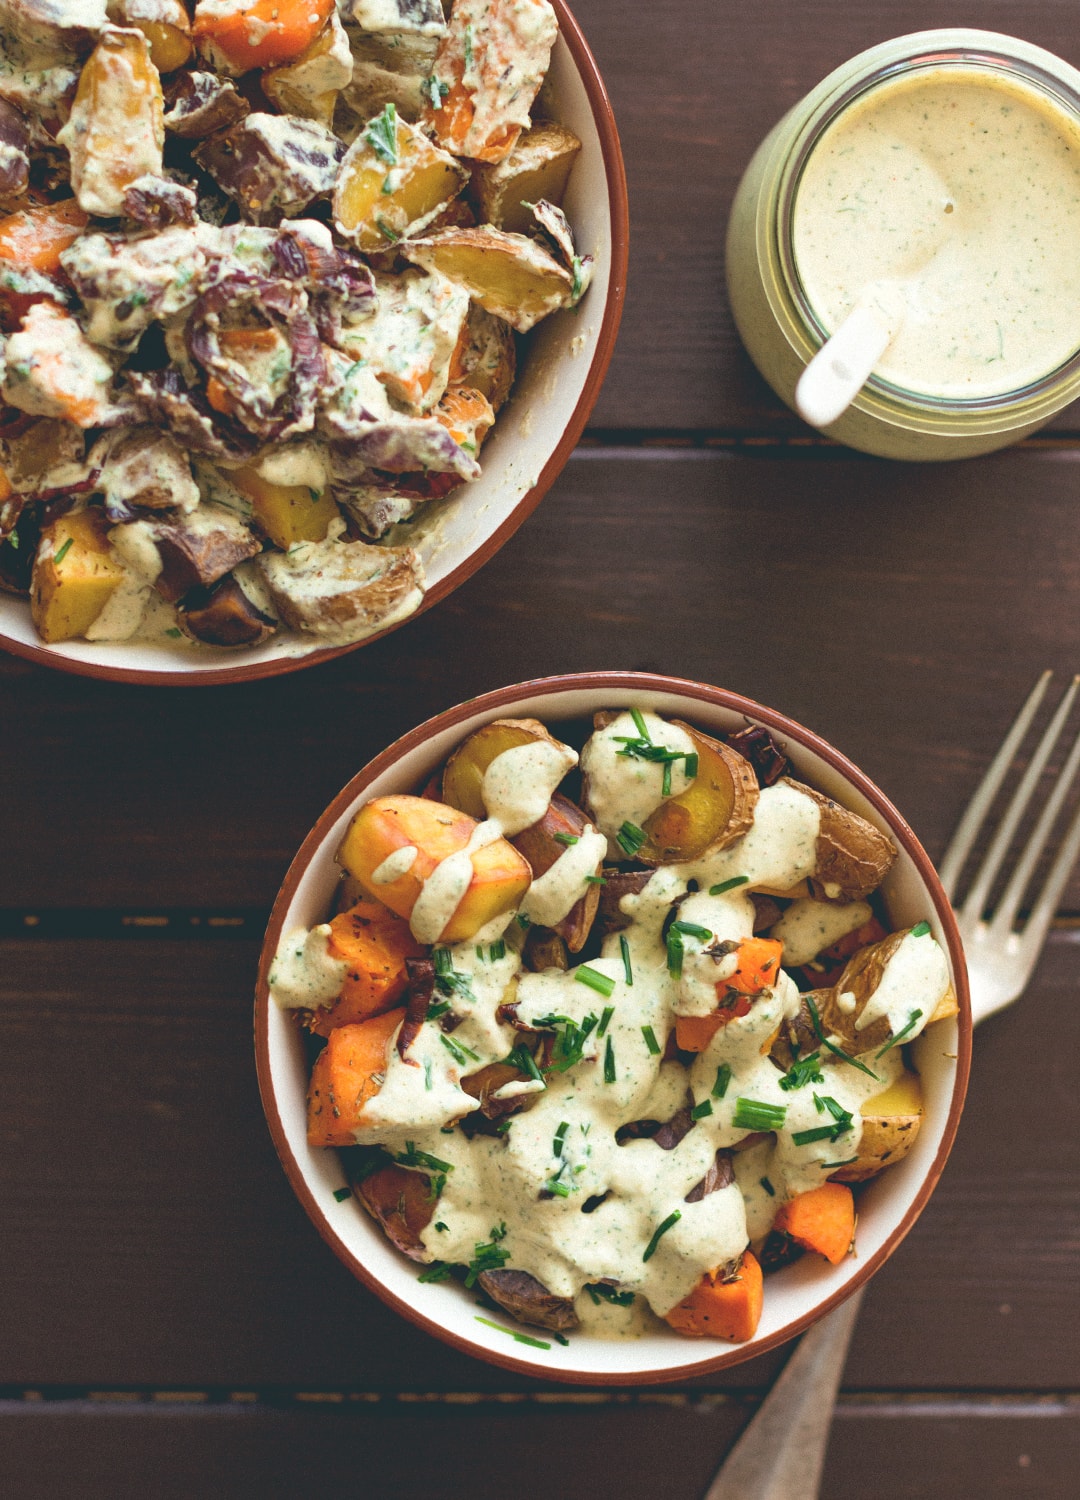 Roasted Potato Salad with Dill Cashew Dressing (vegan, gluten-free) - this is the perfect side dish or a great addition to vegan brunch. Potatoes roasted with herbs, drizzled with amazing cashew dressing with dill. | thehealthfulideas.com